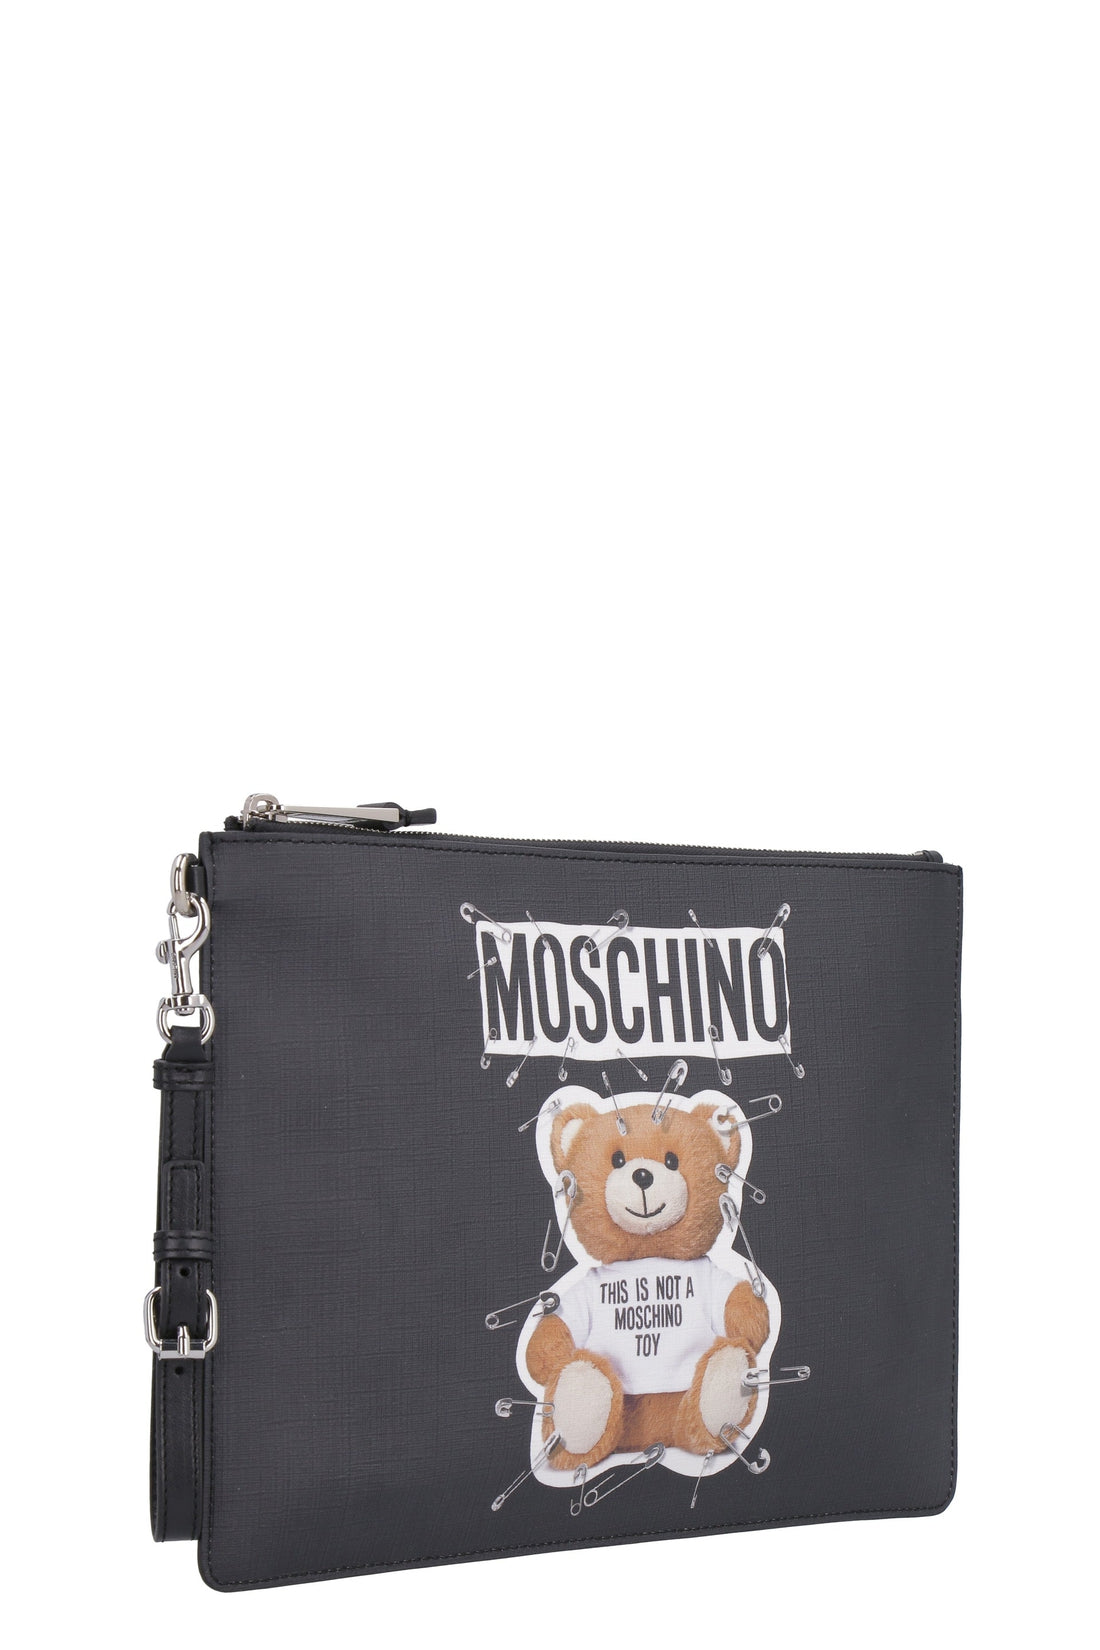 Moschino-OUTLET-SALE-Printed flat pouch-ARCHIVIST